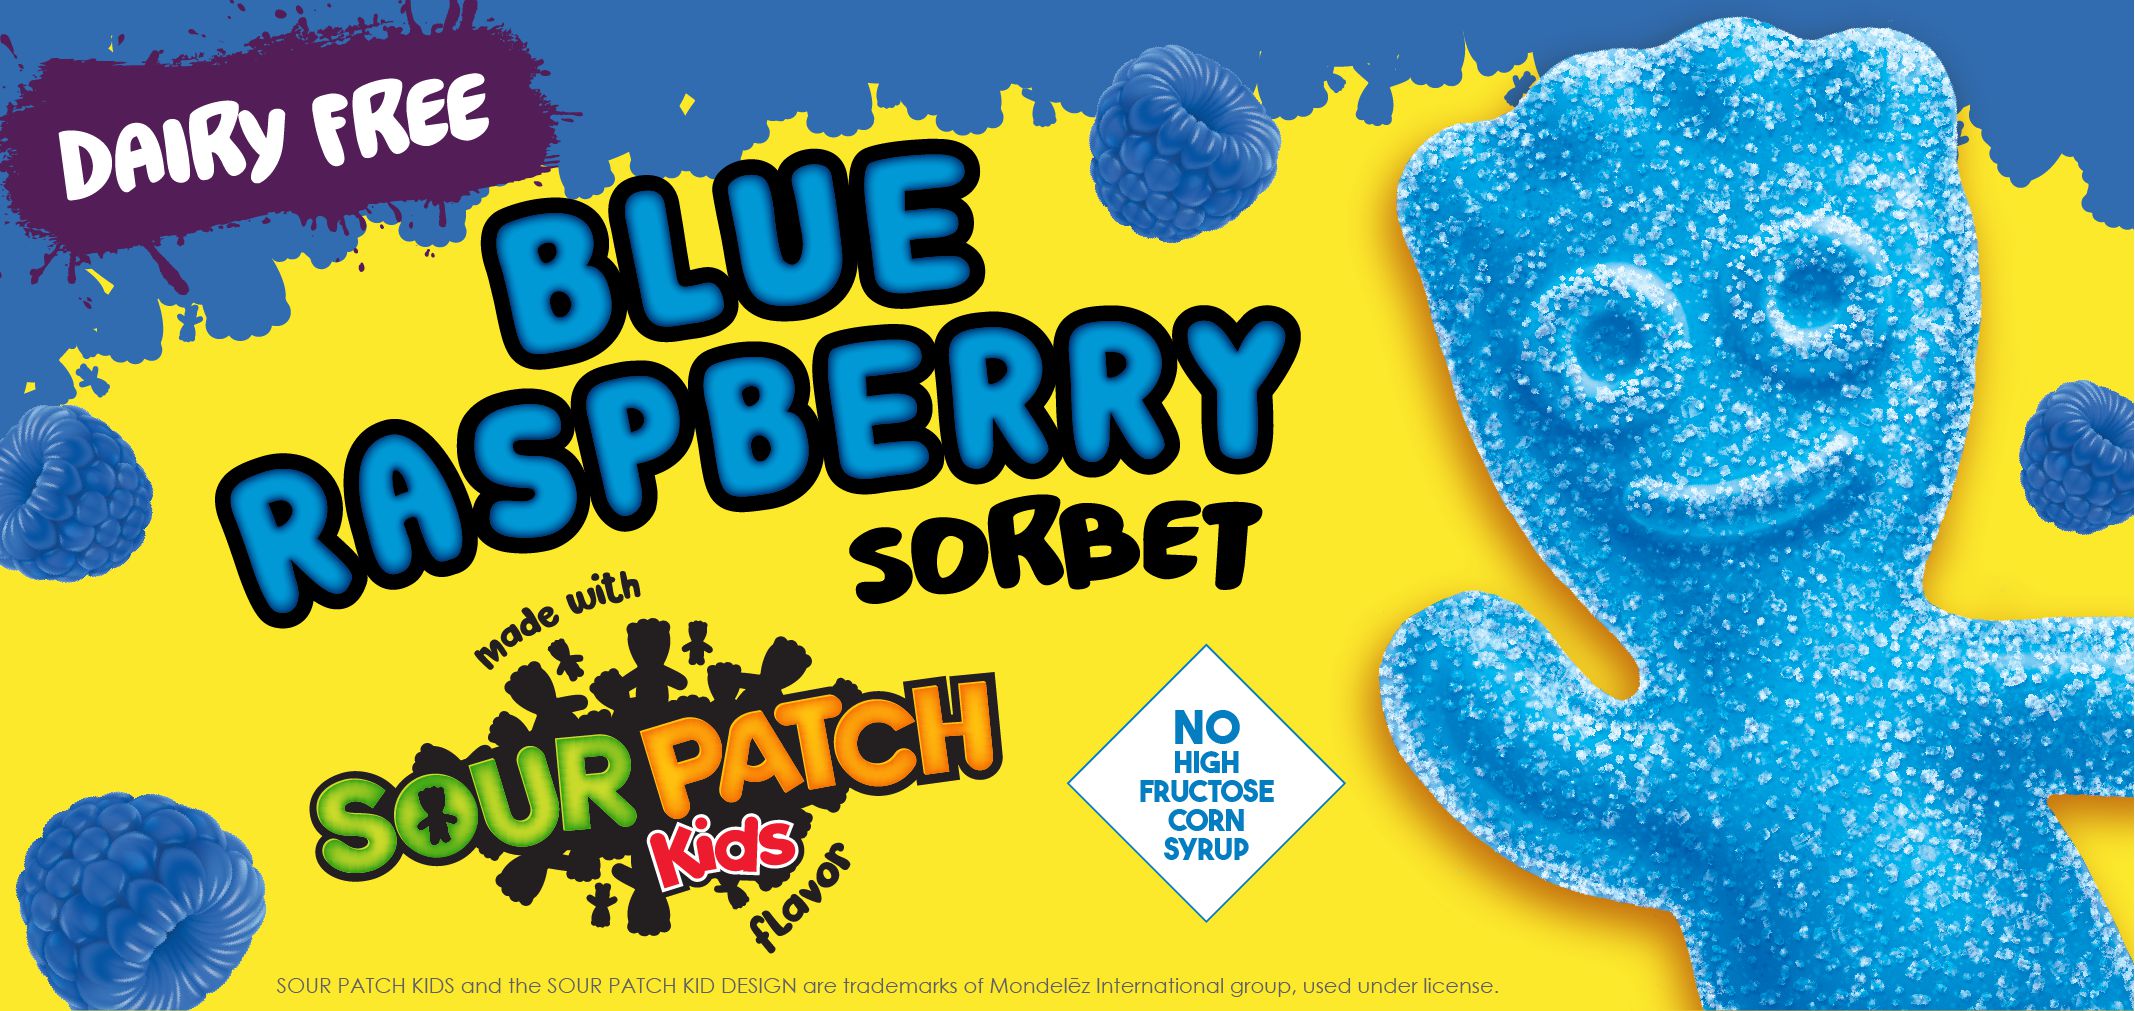 blue raspberry sorbet made with sour patch kids label image